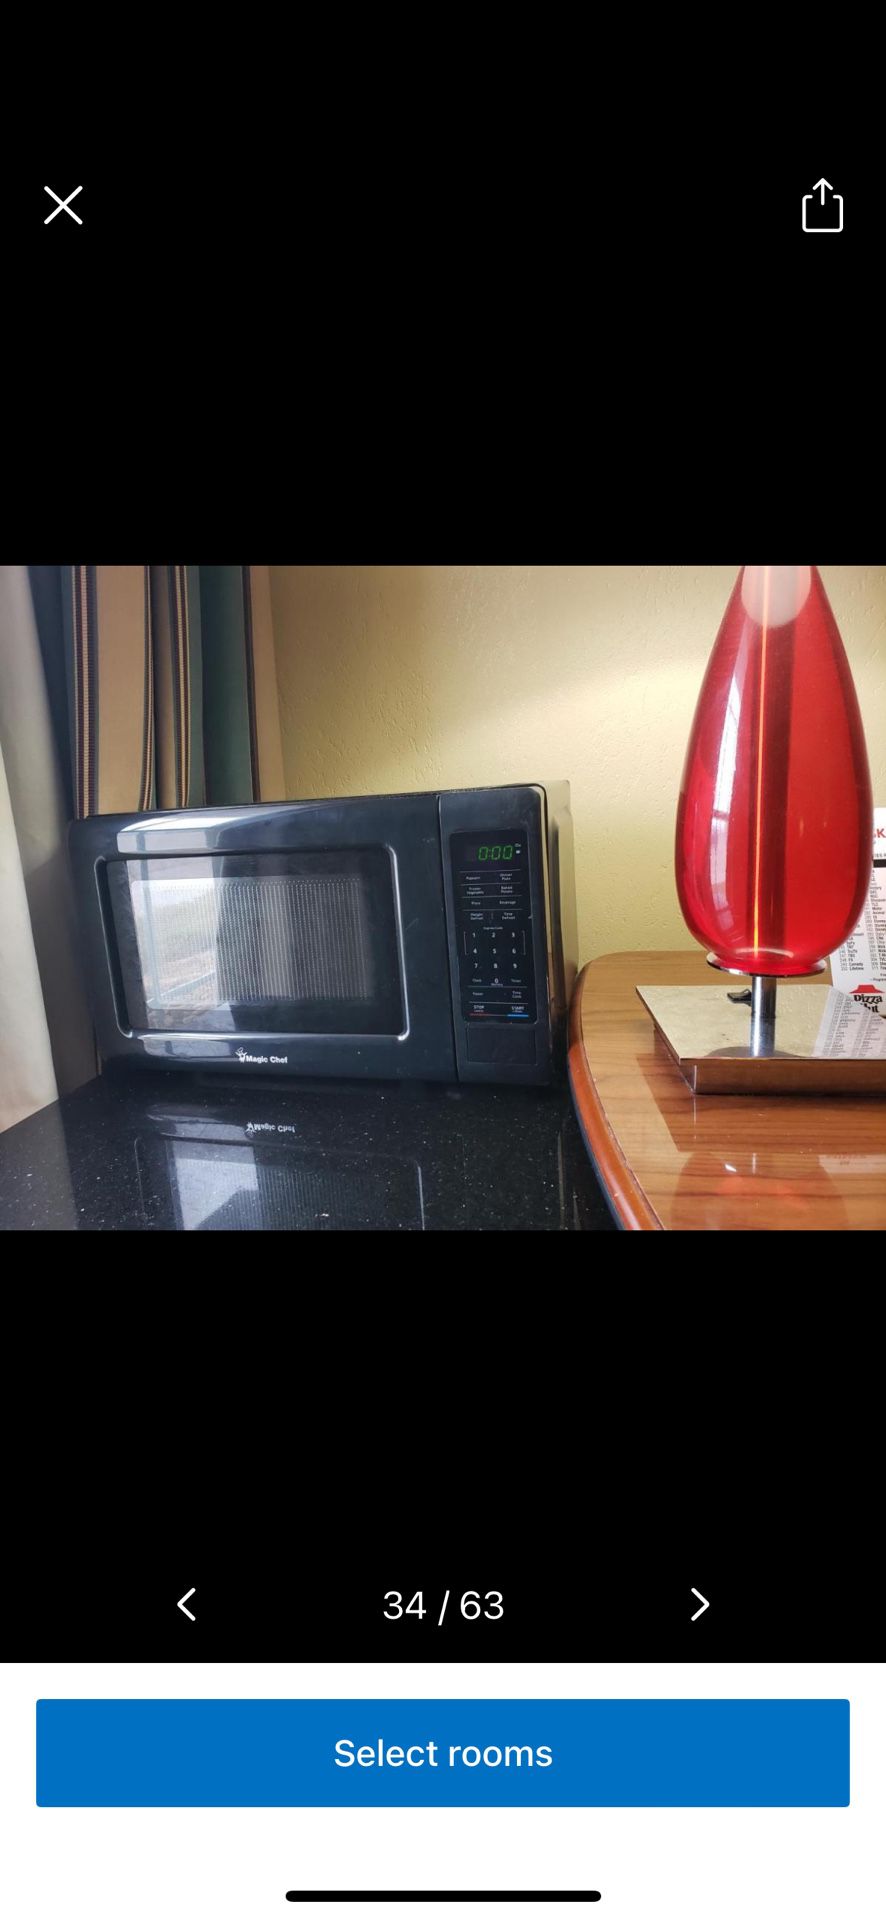 The Magic Chef 0.7 cu. ft. Countertop Microwave in Black